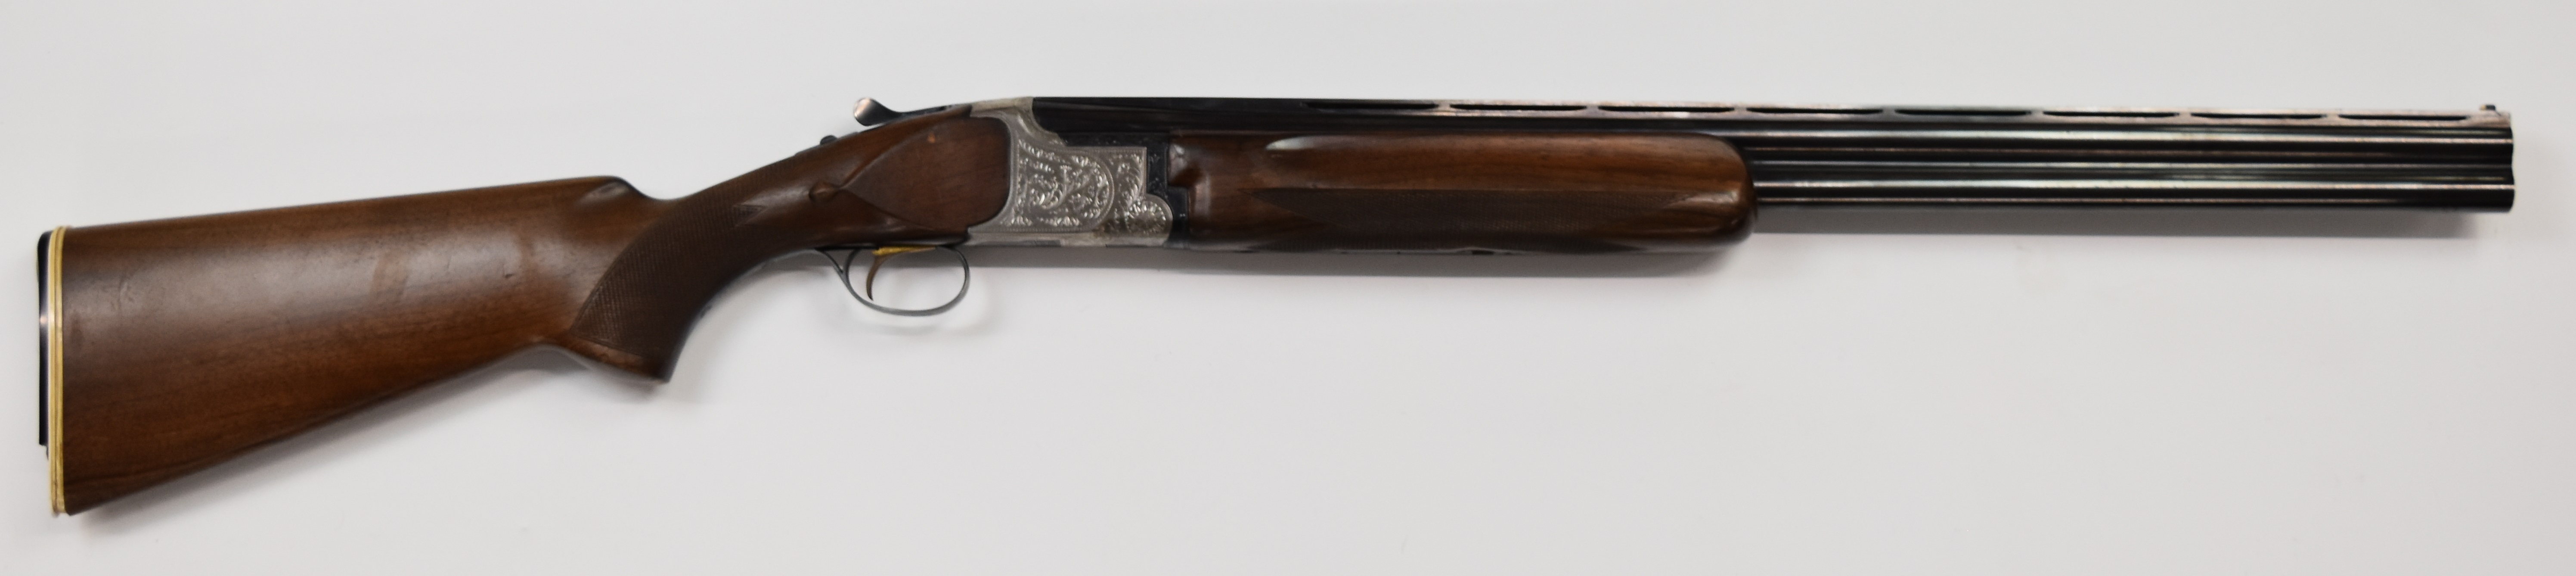 Miroku 12 bore over and under ejector shotgun with engraved locks, underside, trigger guard, top - Image 2 of 11